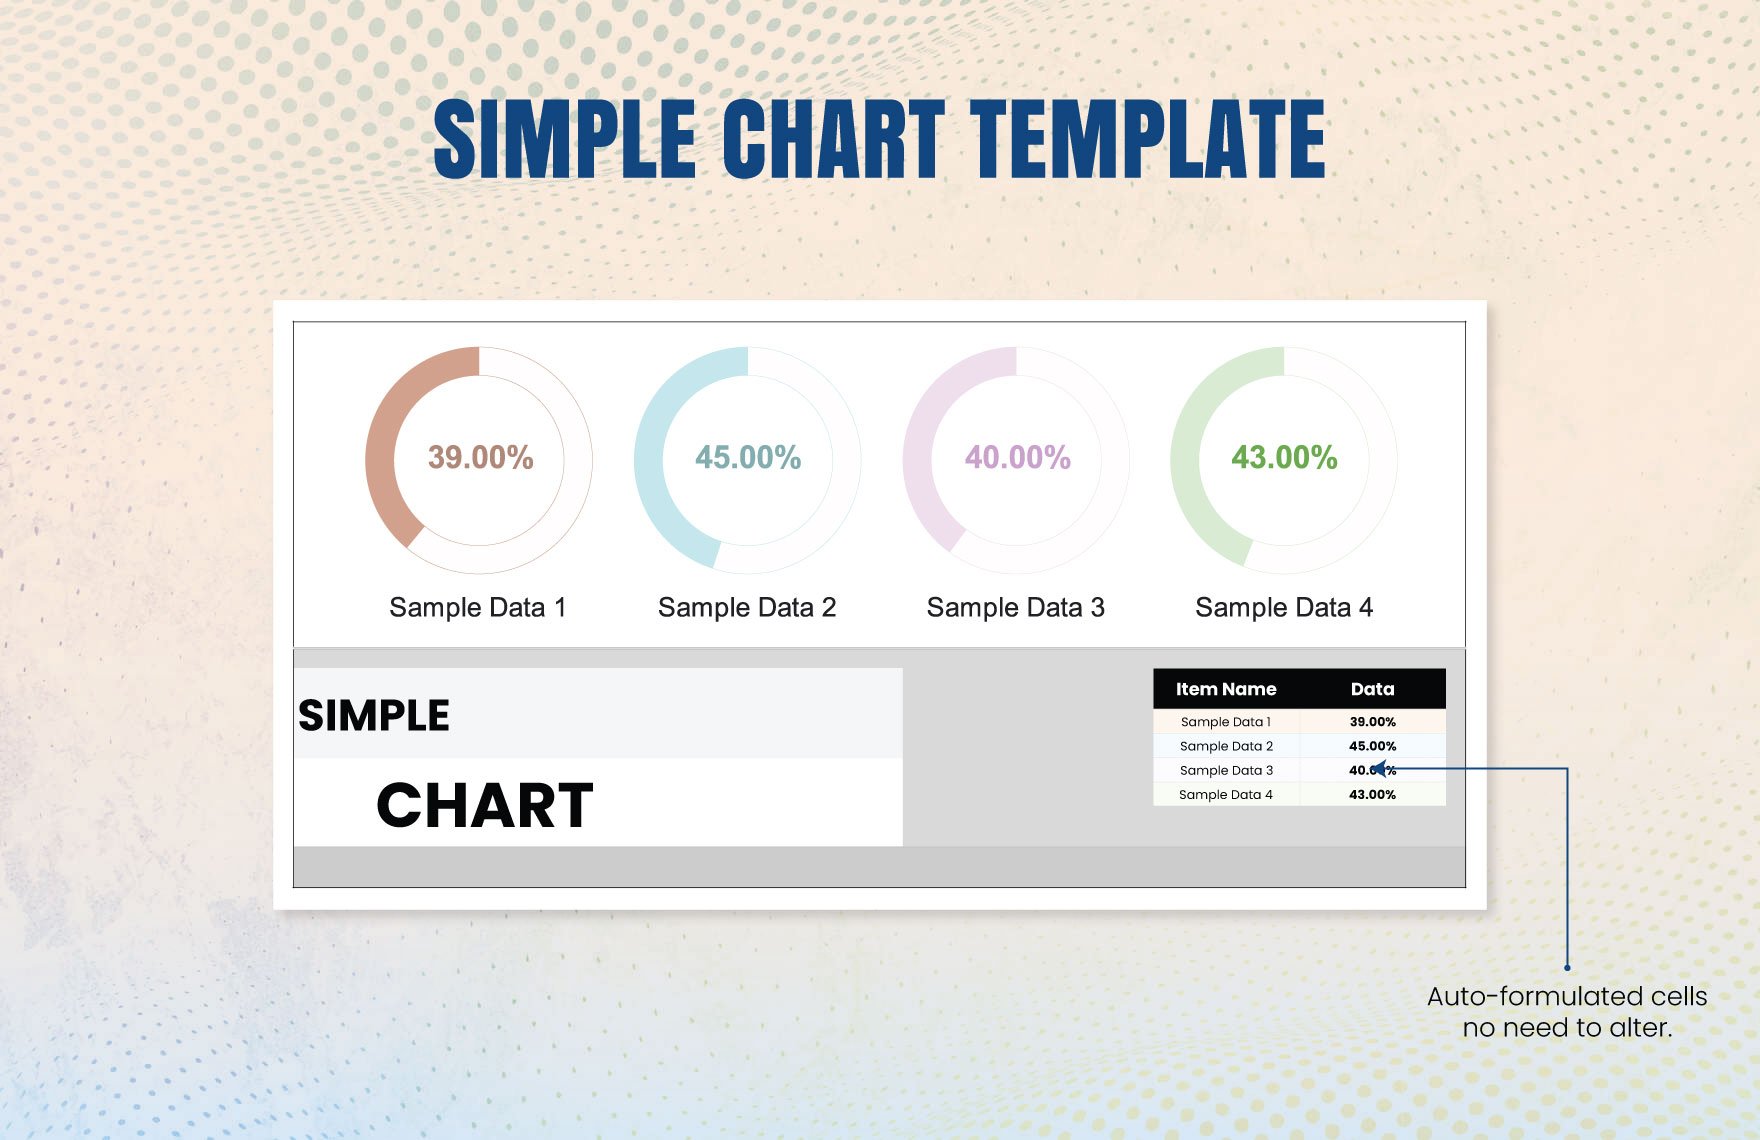 Simple Chart Template